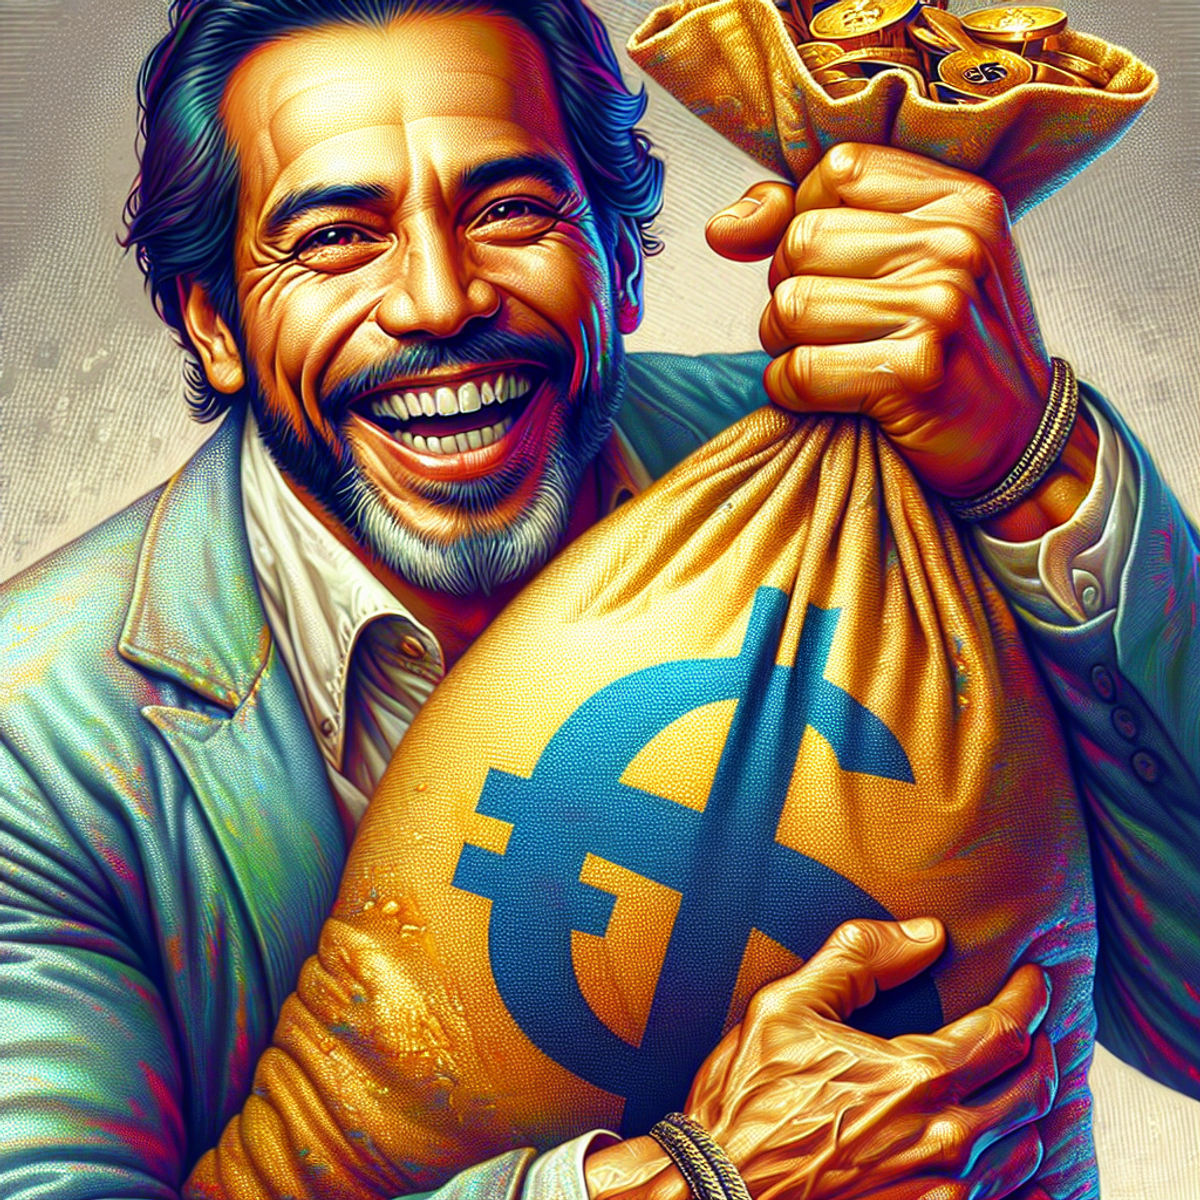 A Hispanic man grinning broadly, holding a bulging bag heavy with gold coins, emblazoned with a dollar sign to signify prosperity.